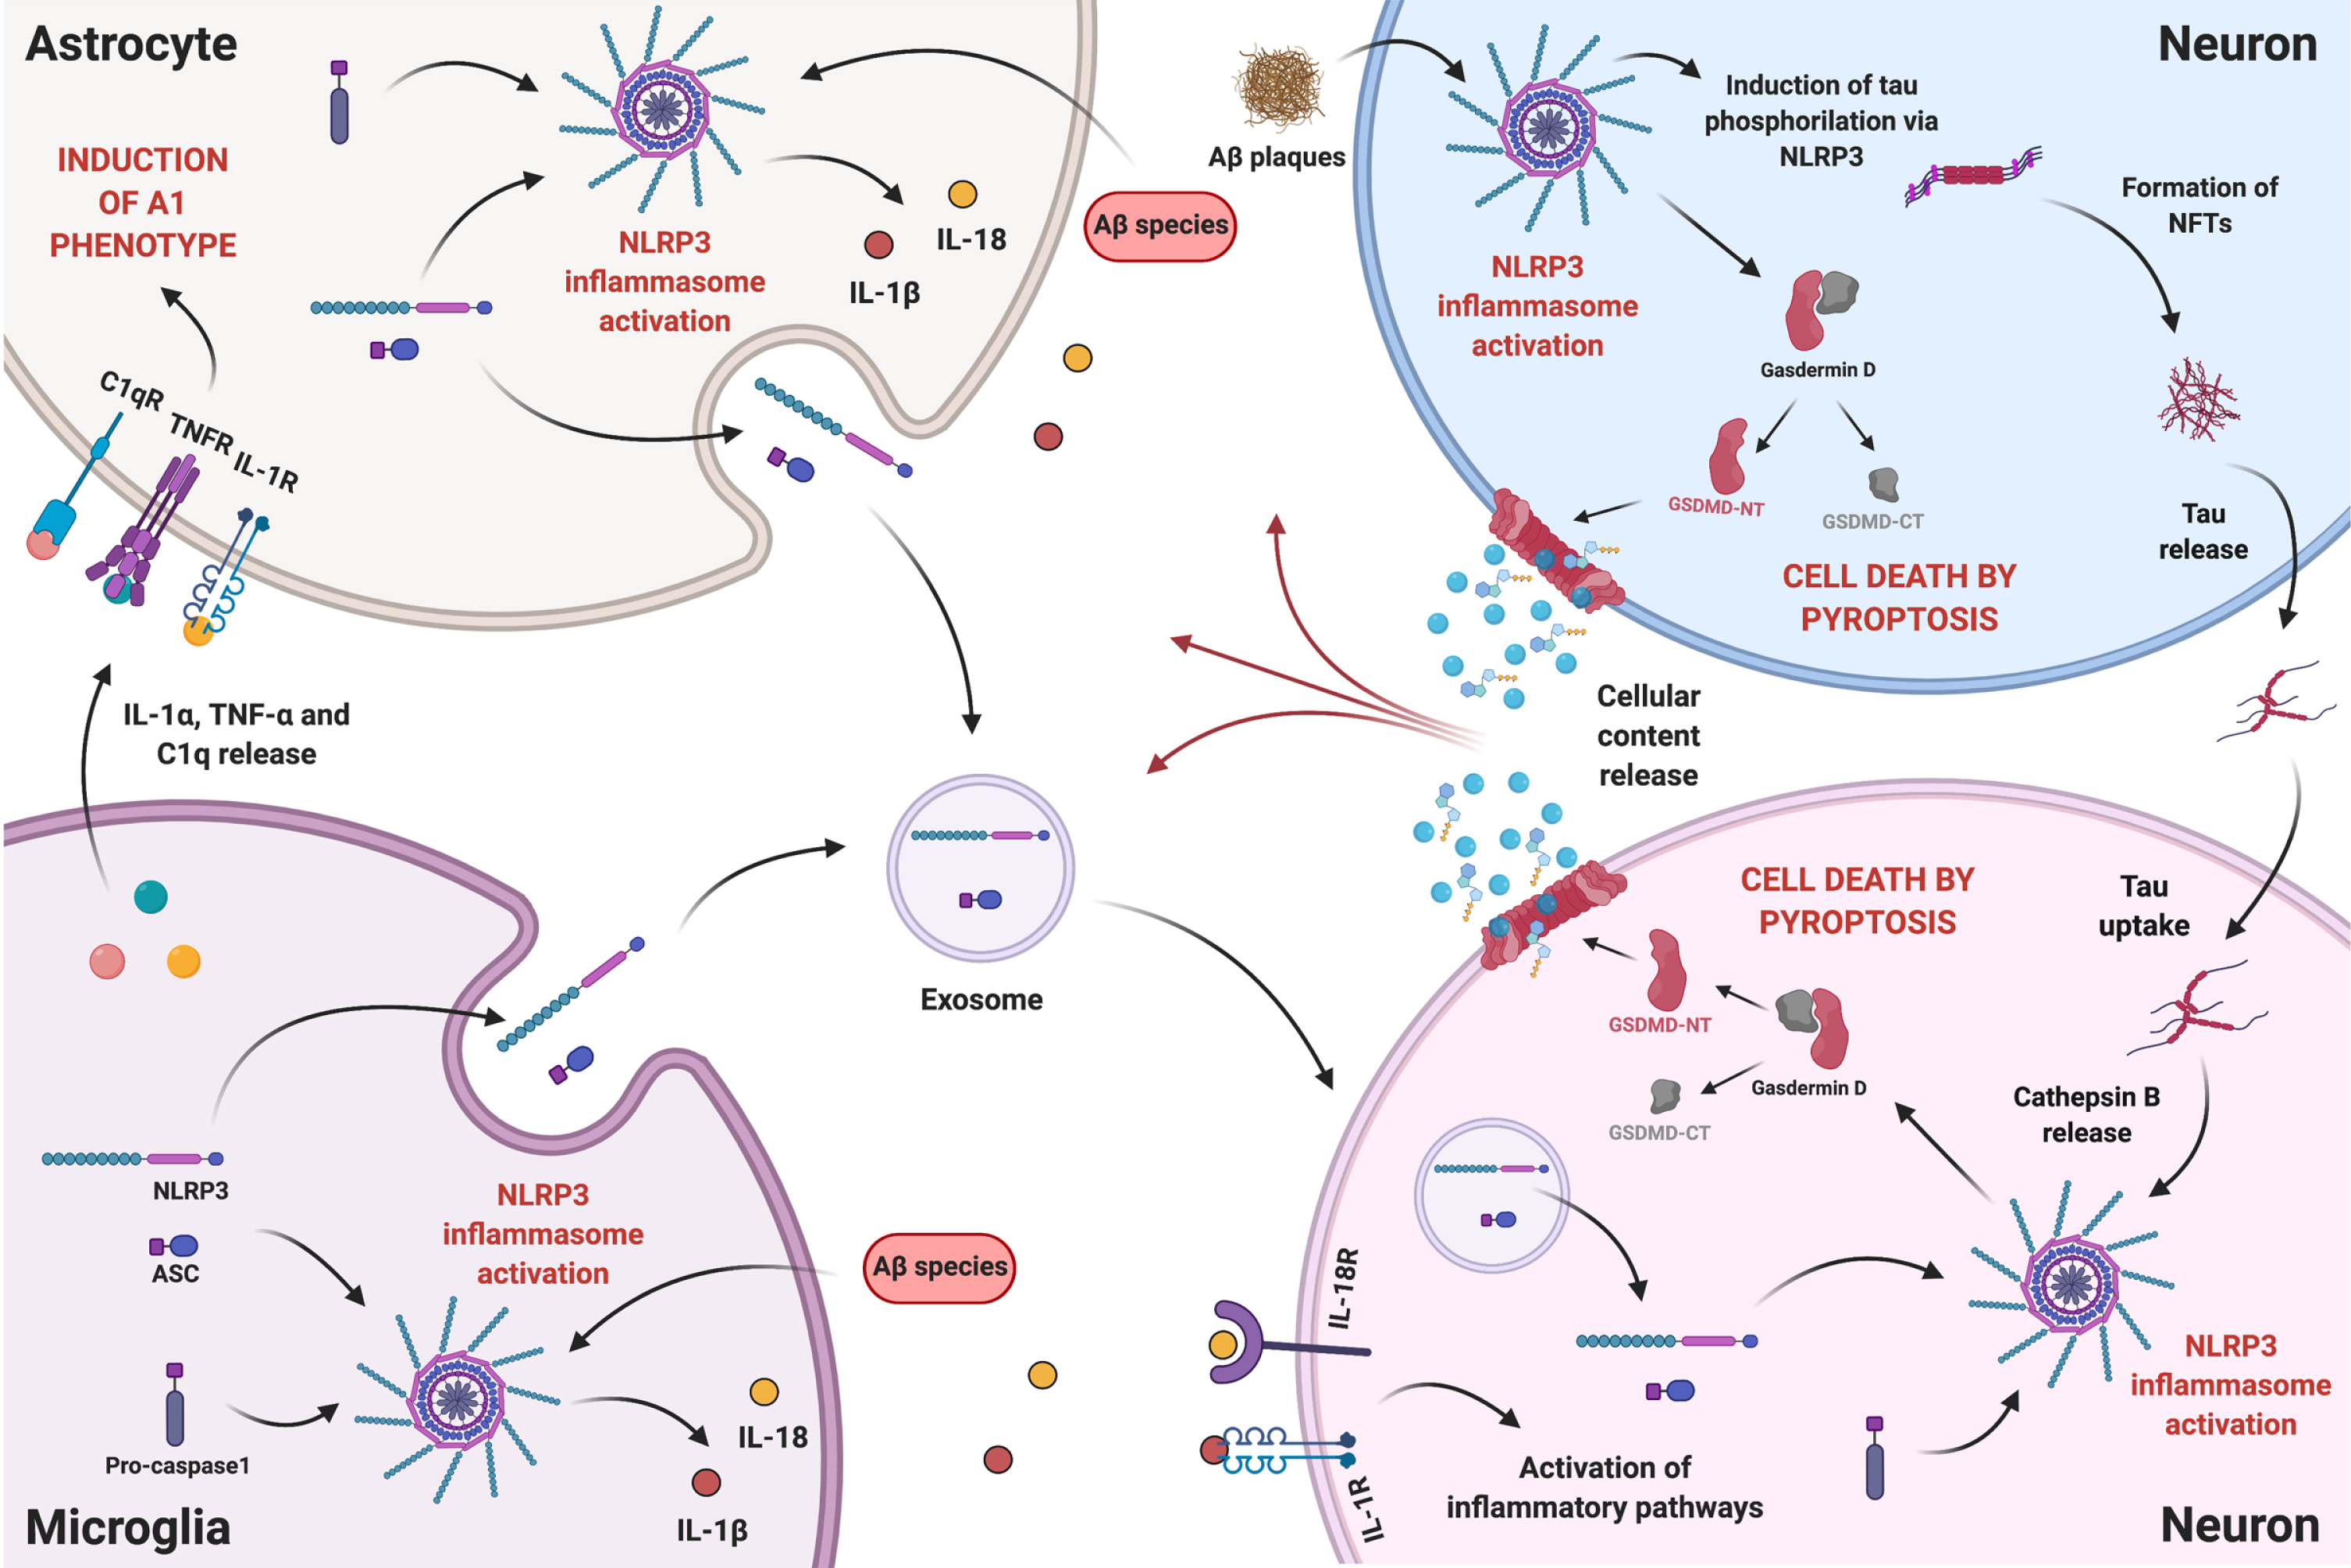 The intercellular communication between neurons and glial cells in the presence of Aβ species is a complex and reciprocal process. Aβ-induced reactive microglia release IL-1α, TNF-α, and C1q, which can be received by resting astrocytes promoting the reactive A1 state. NLRP3 activation in reactive glial cells, boosts the release of pro-inflammatory cytokines IL-1β and IL-18, which can bind to their respective receptors in neurons activating inflammatory pathways. Reactive glial cells might also release NLRP3 components, namely NLRP3 domain and ASC, through exosomes that can be internalized by neurons. On the other hand, Aβ plaques can, in neighboring neurons, mediate the occurrence of pyroptosis and promote the development of NFTs, via NLRP3 activation. More importantly, tau can be released and taken up by other neurons, activating NLRP3 in the recipient cell, hypothetically through lysosomal destabilization and Cathepsin B release, and inducing pyroptosis. Therefore, proximity to Aβ plaques will not determine neuronal death by NLRP3-mediated pyroptosis, since, due to tau interneuronal propagation, pyroptosis can occur in neurons far from plaques. Ultimately, release of cellular content caused by pyroptosis will feed a self-propagating loop of neuroinflammatory mediators. Created with BioRender.com.